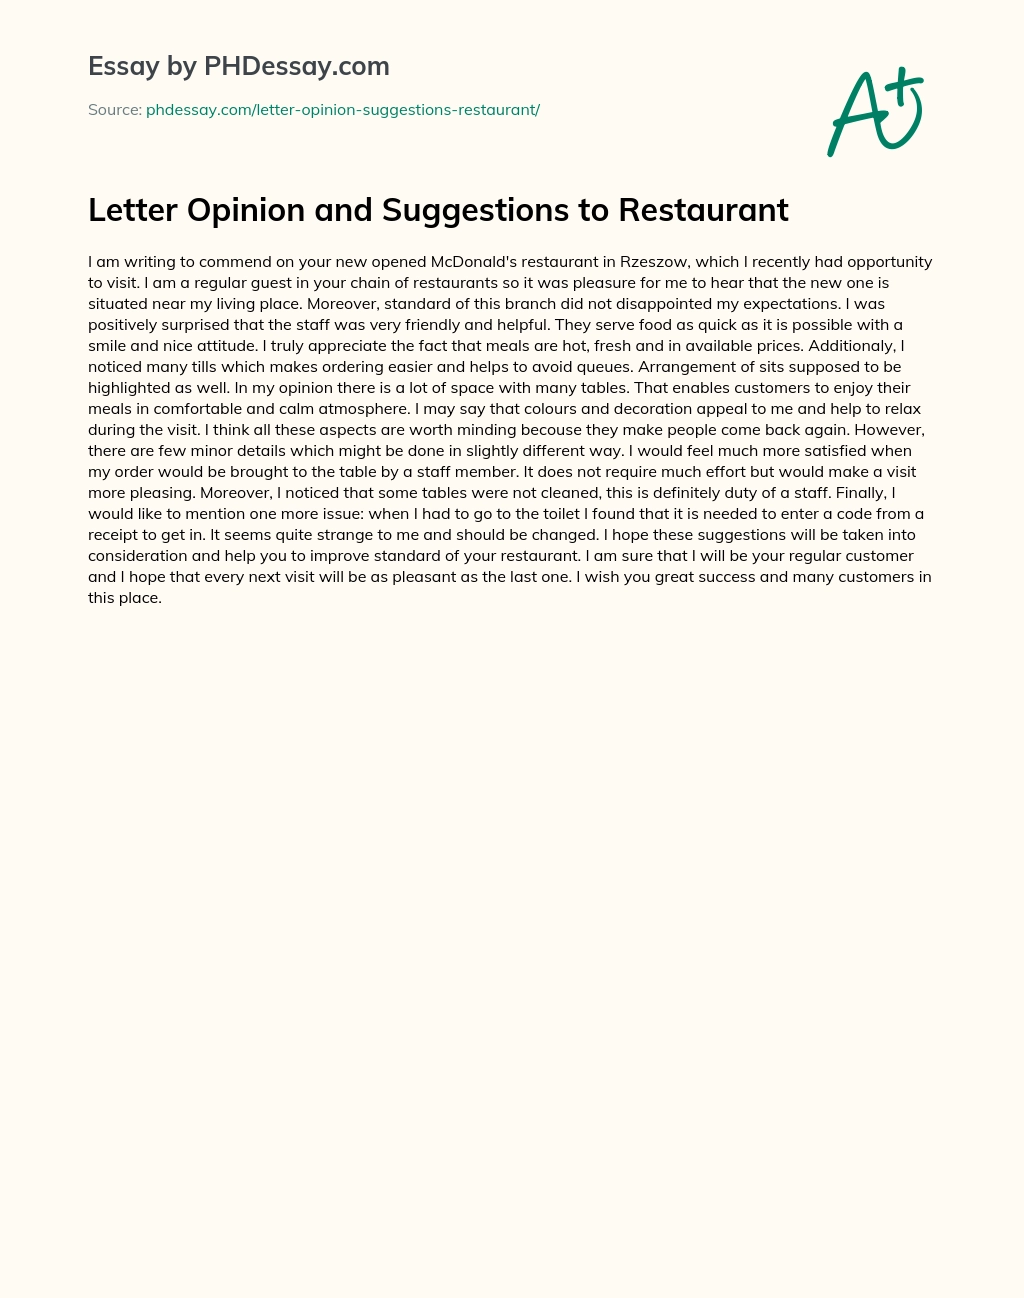 Letter Opinion and Suggestions to Restaurant essay